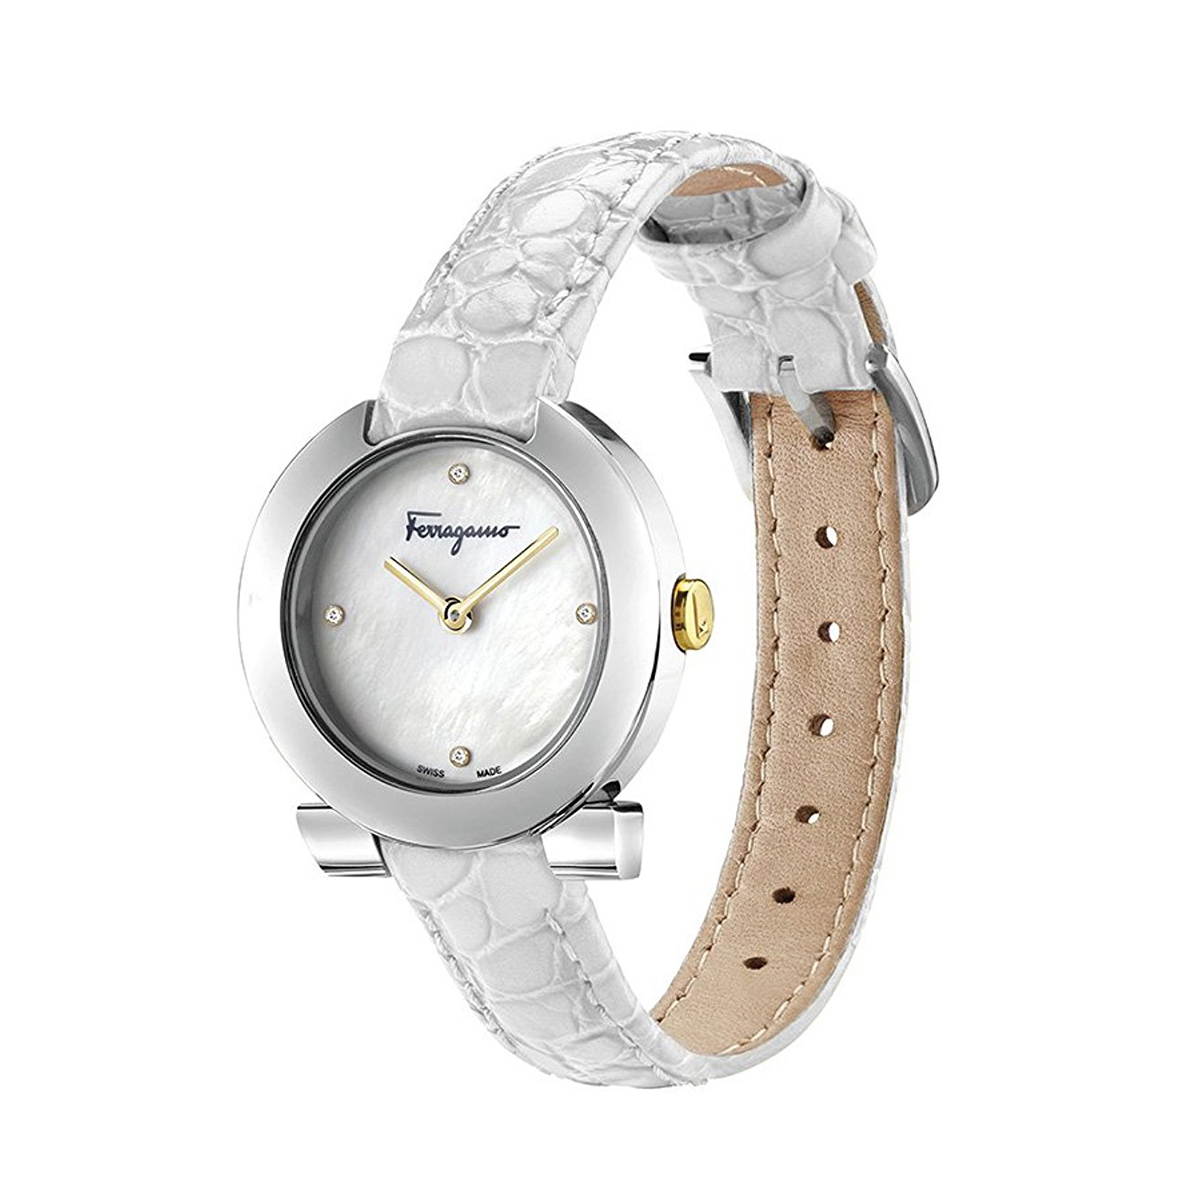 GANCINO STAINLESS WHITE LEATHER LADIES WATCH FAP010016, 30MM